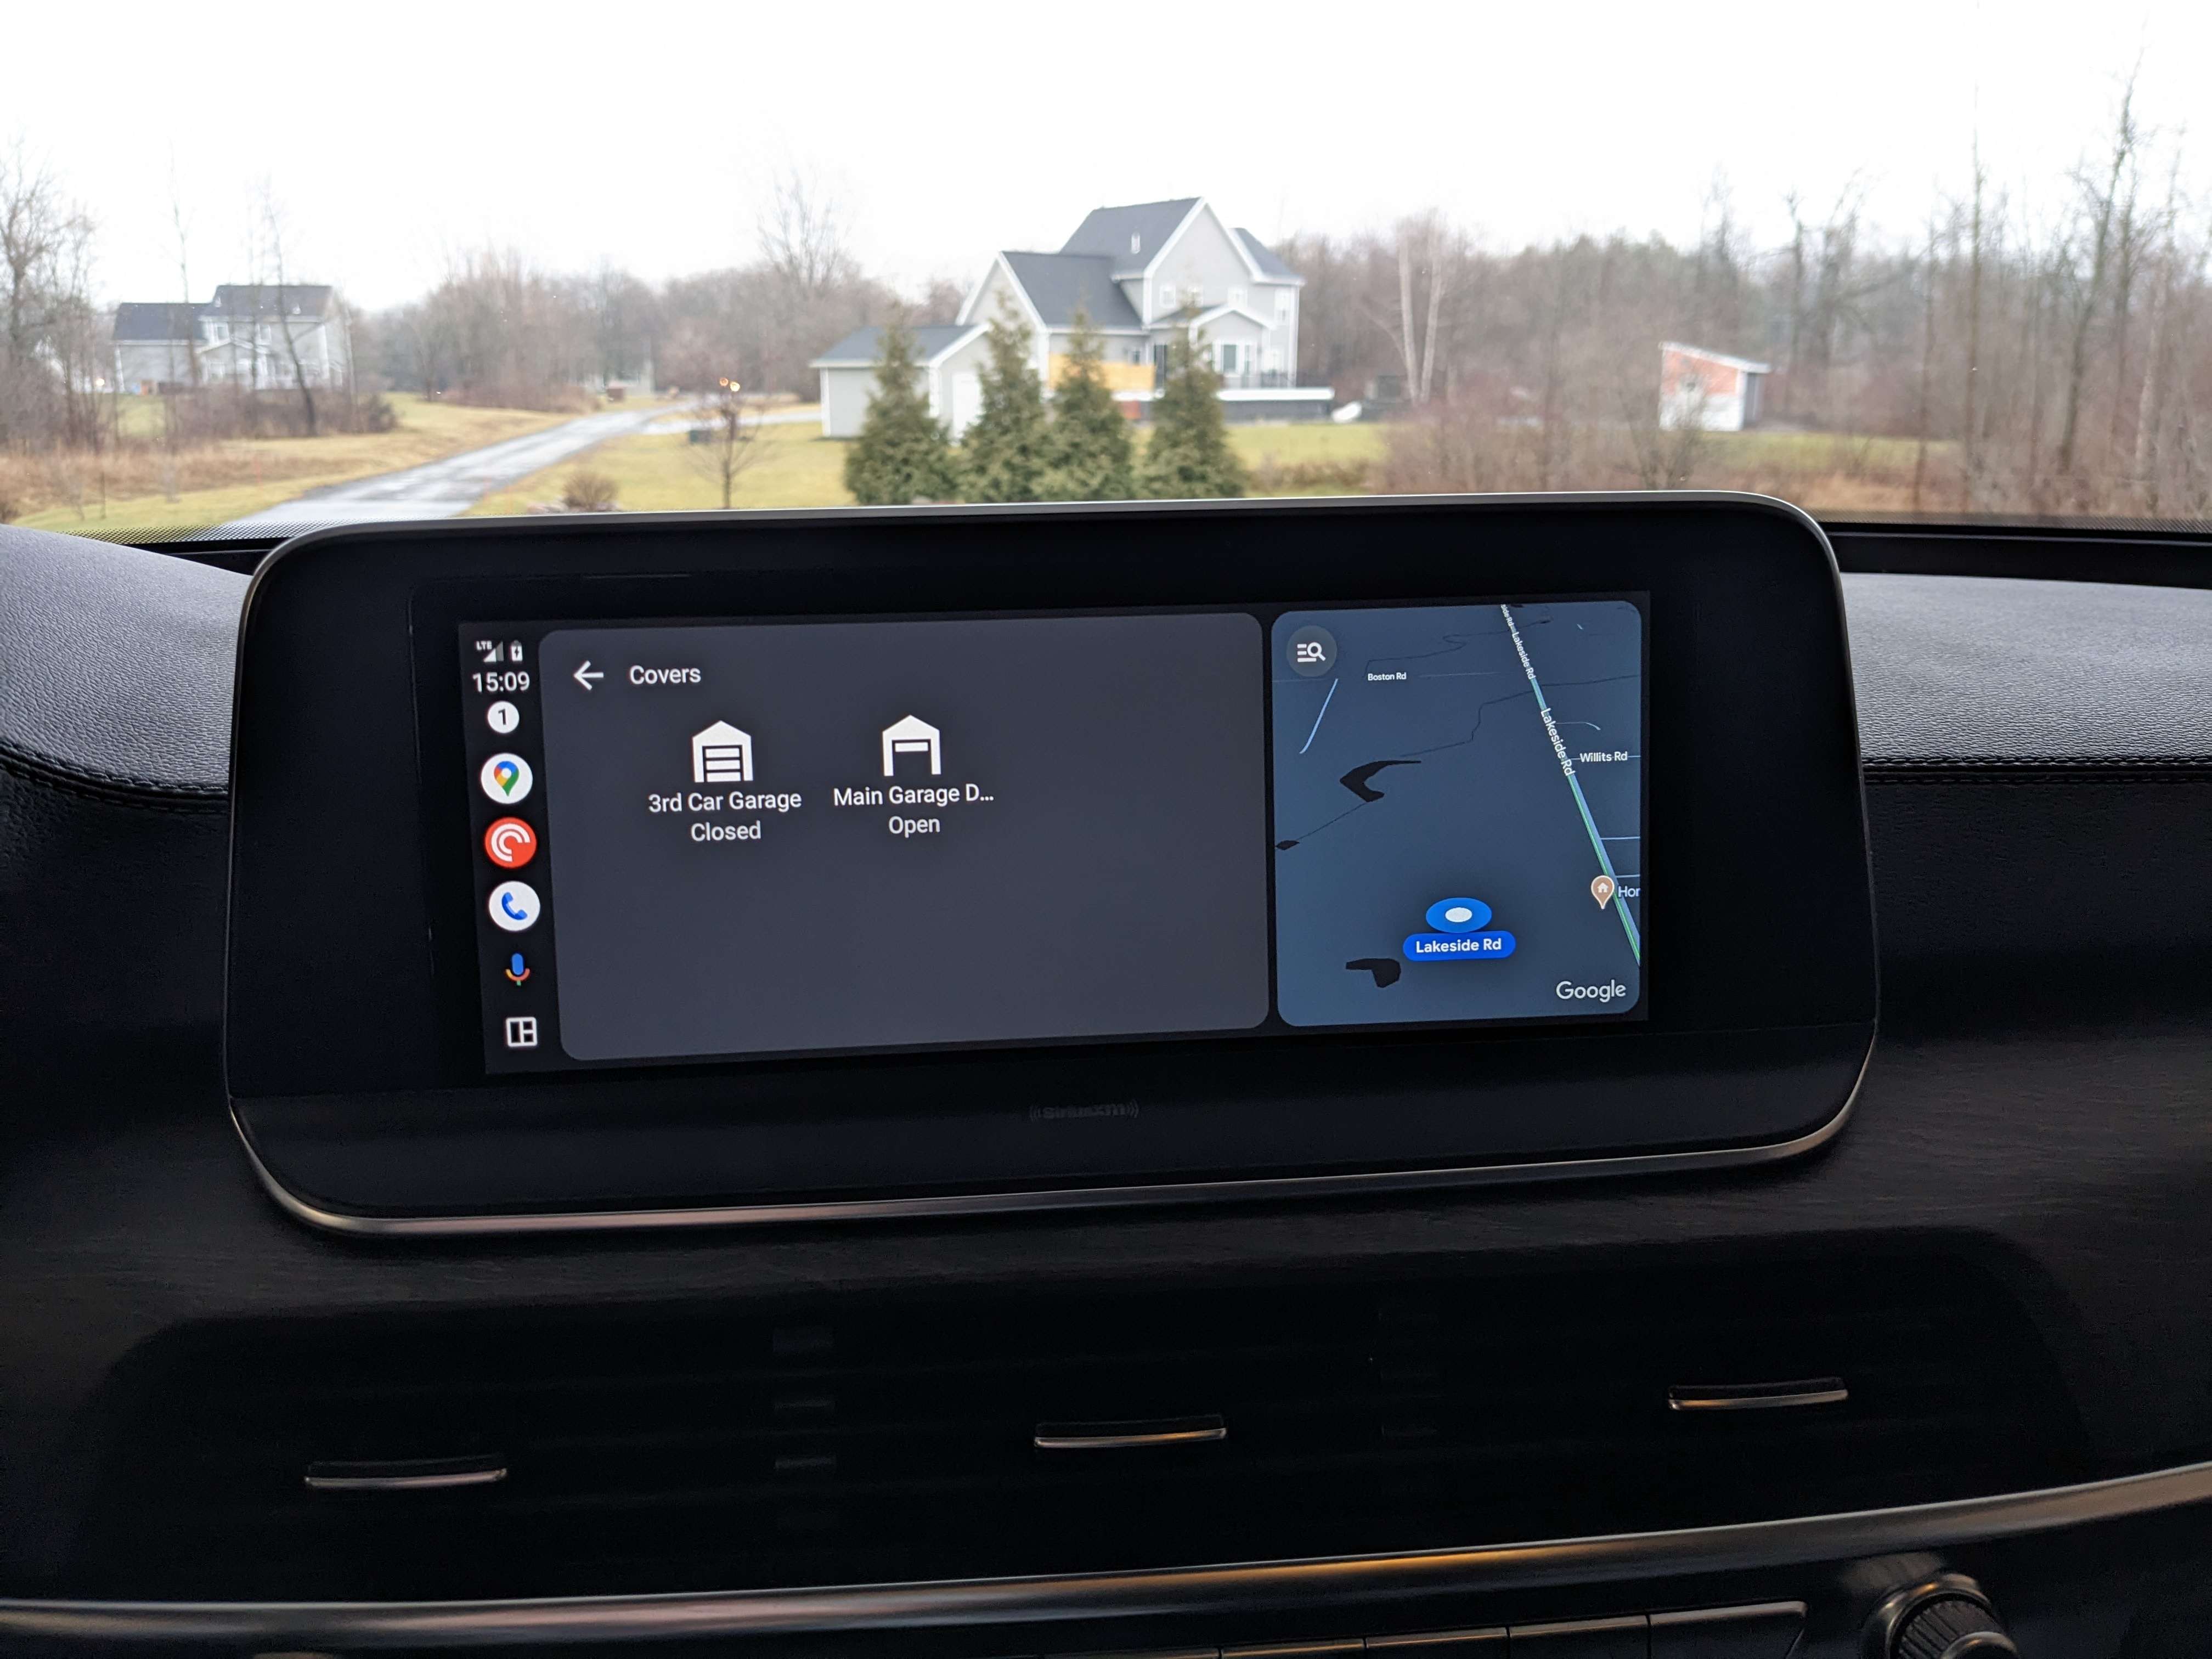 Google maps not able to set destination in android auto - Android Auto  Community